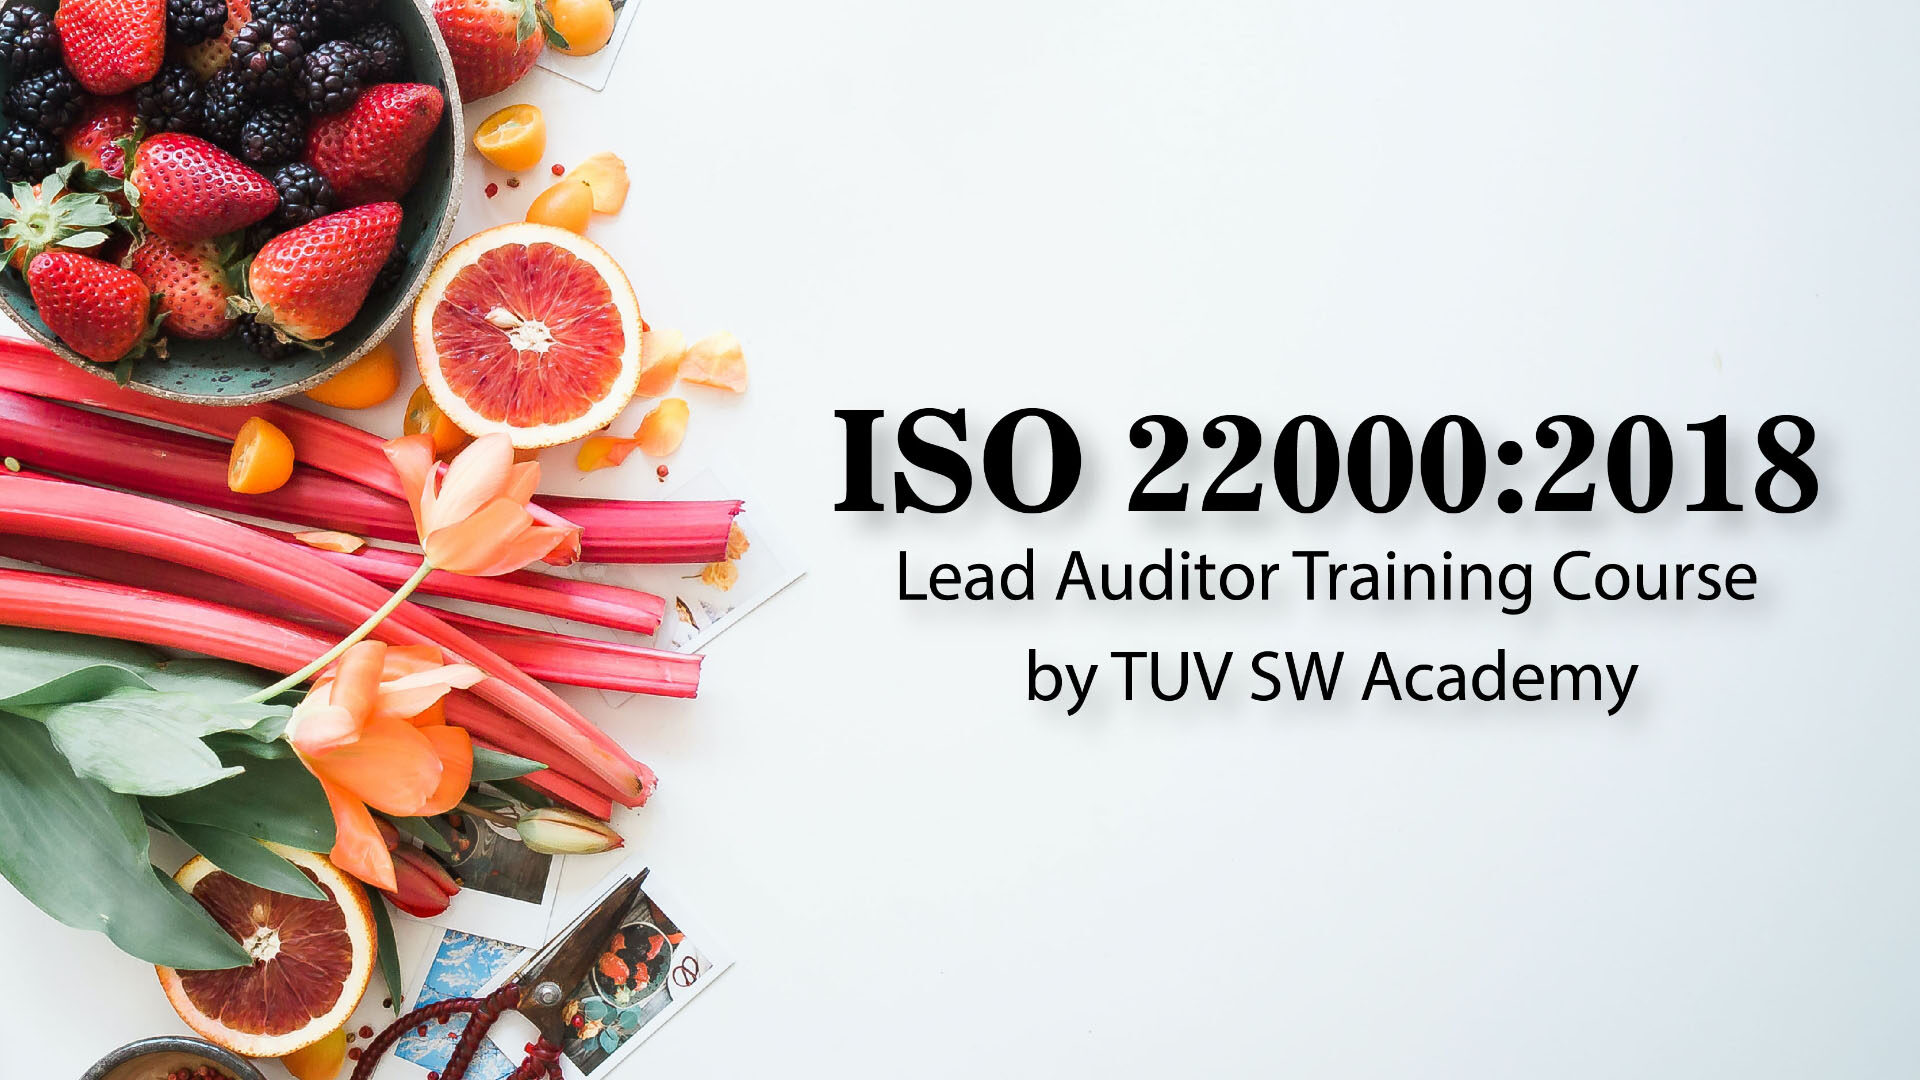 ISO 22000:2018 (FSMS) Lead Auditor Training Course